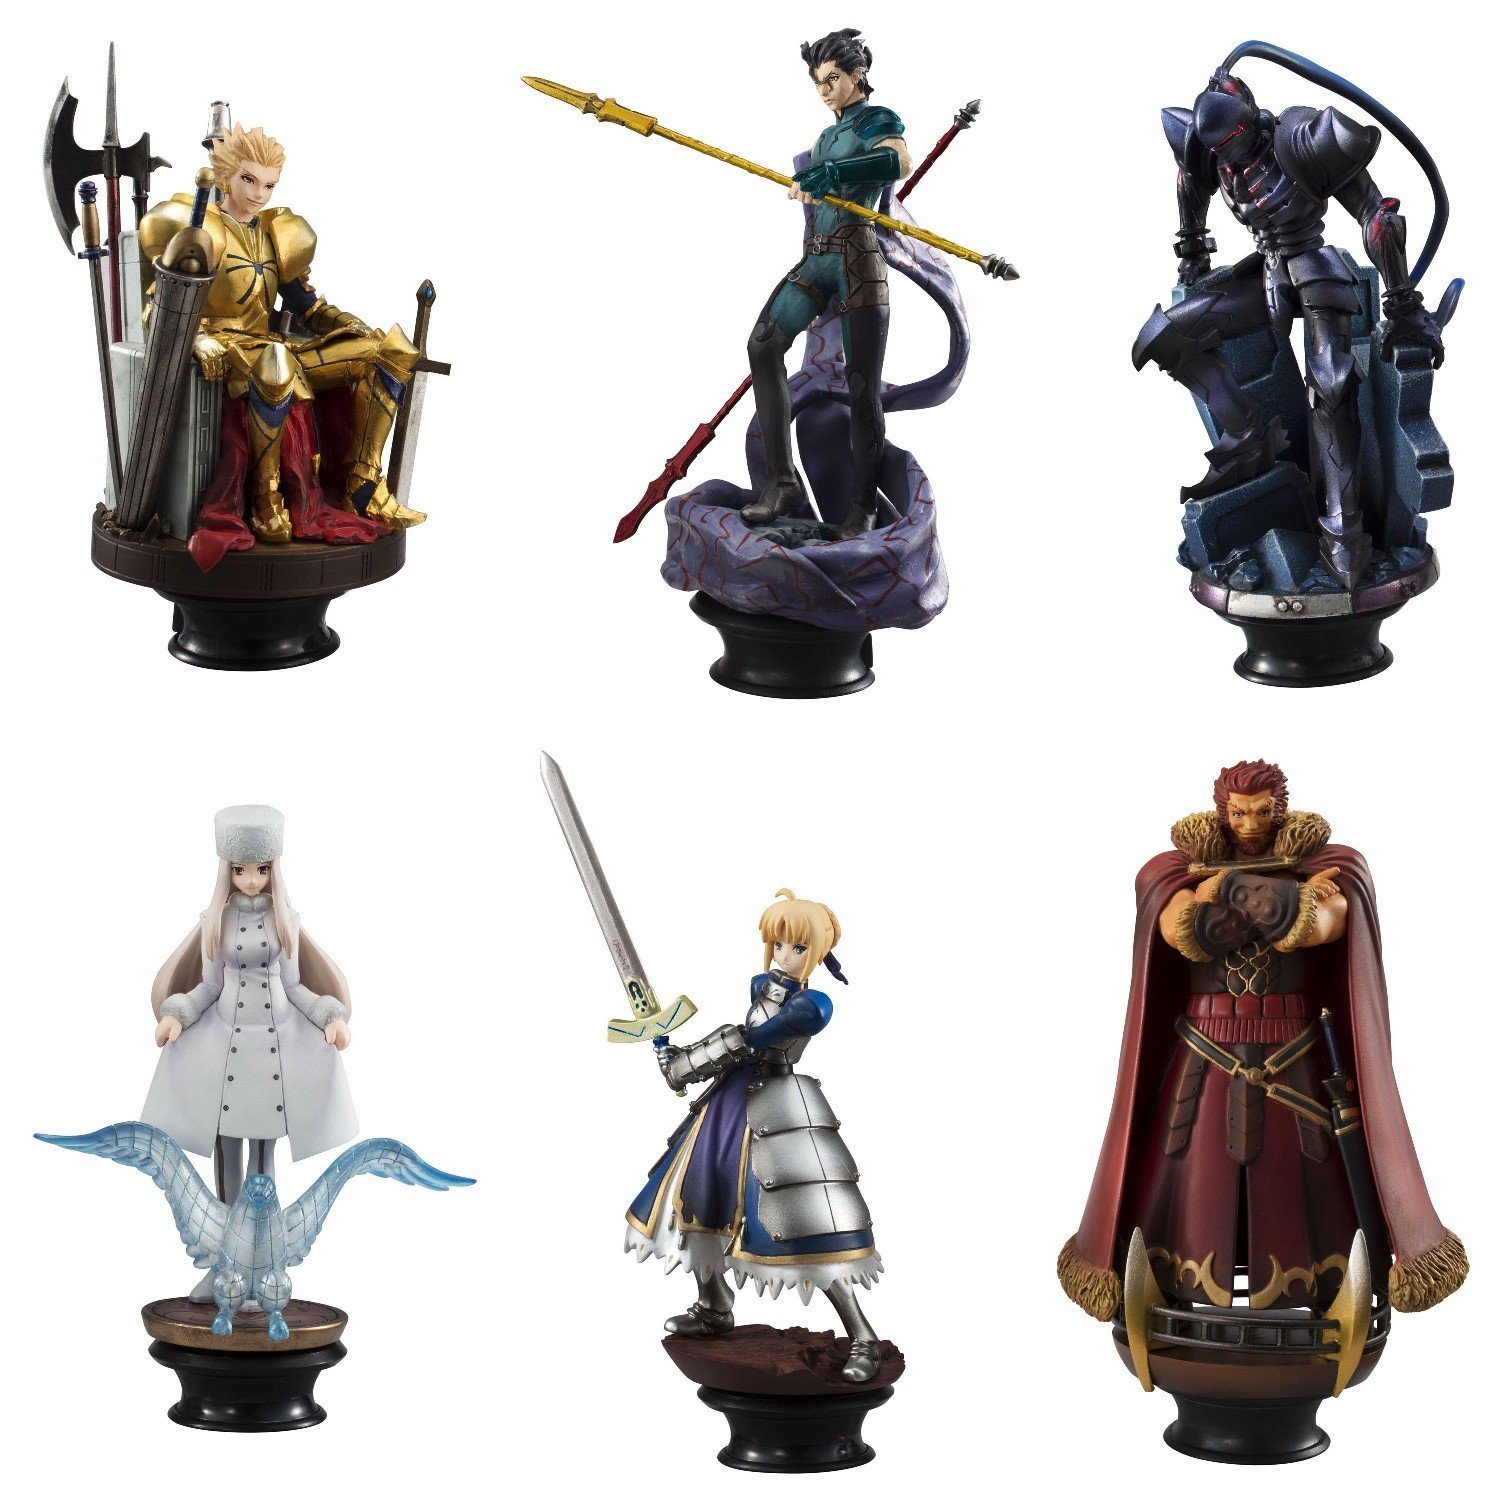 Fate/Zero Anime Inspires Chess Pieces from Megahouse - Interest - Anime